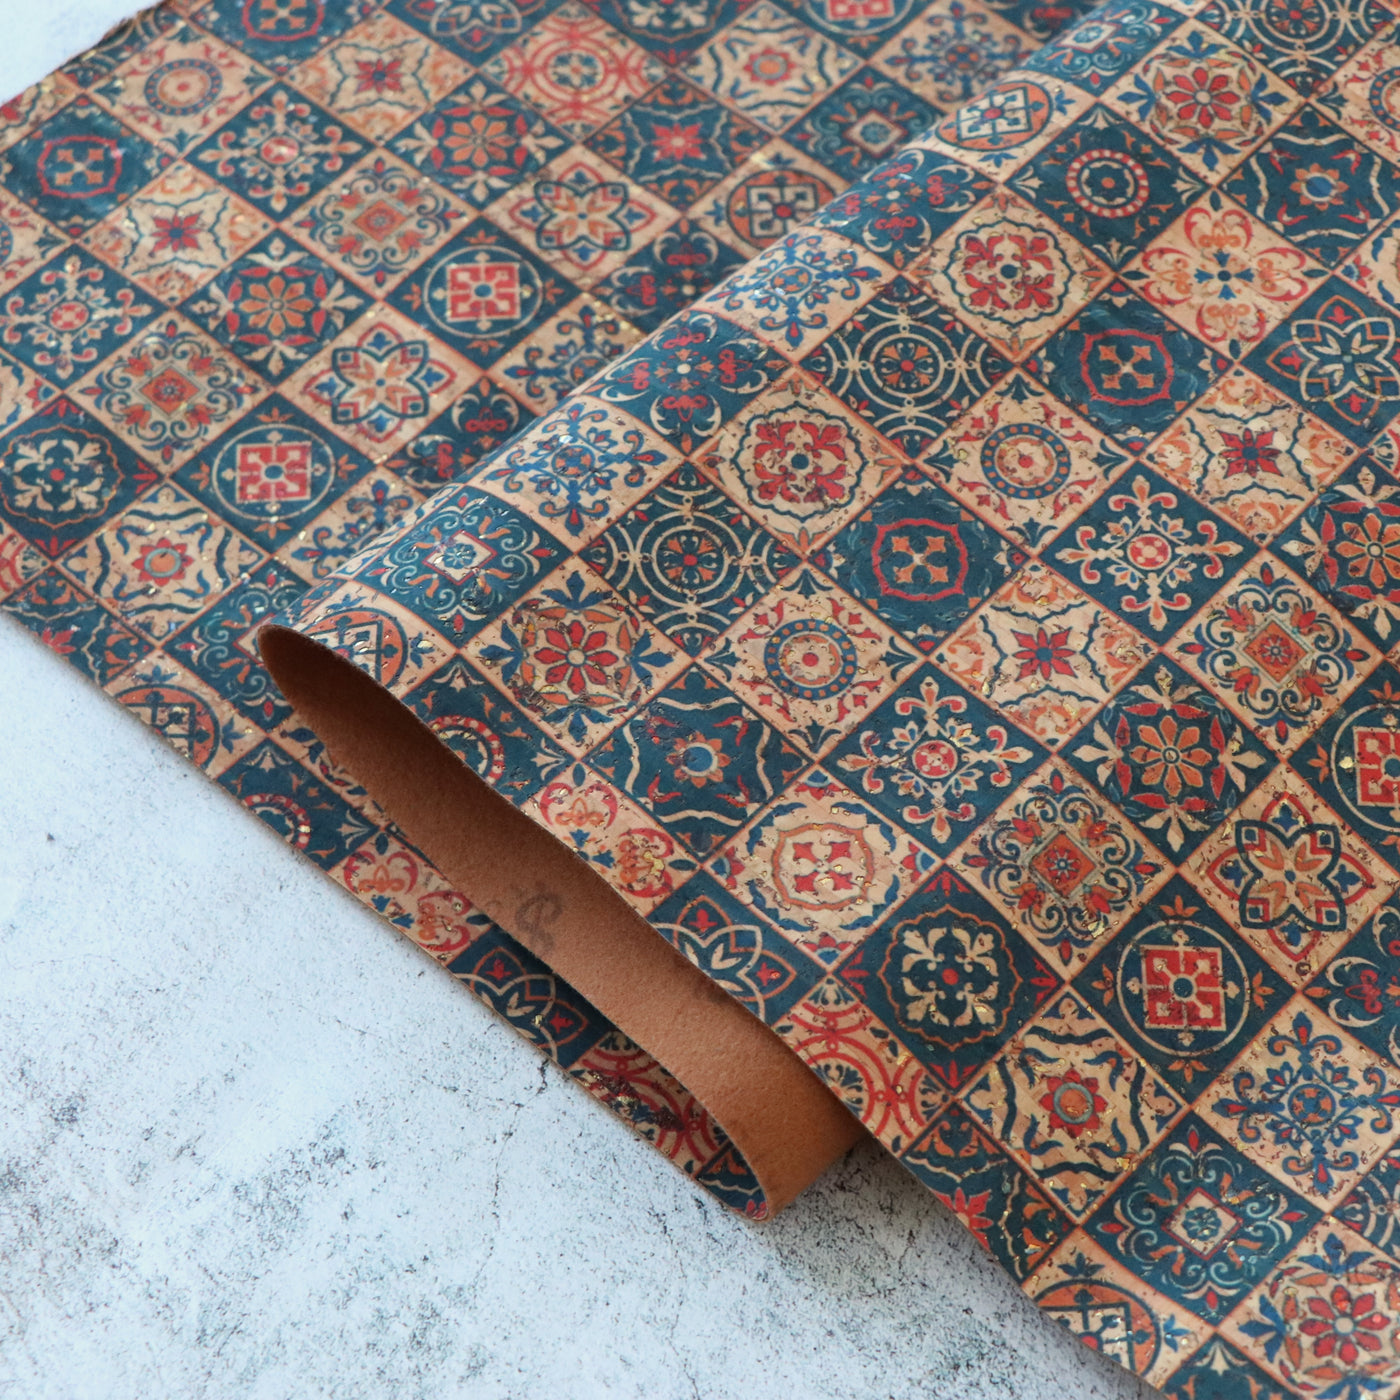 Limited Edition: Gold Flecked Moroccan Mosaic Cork Fabric